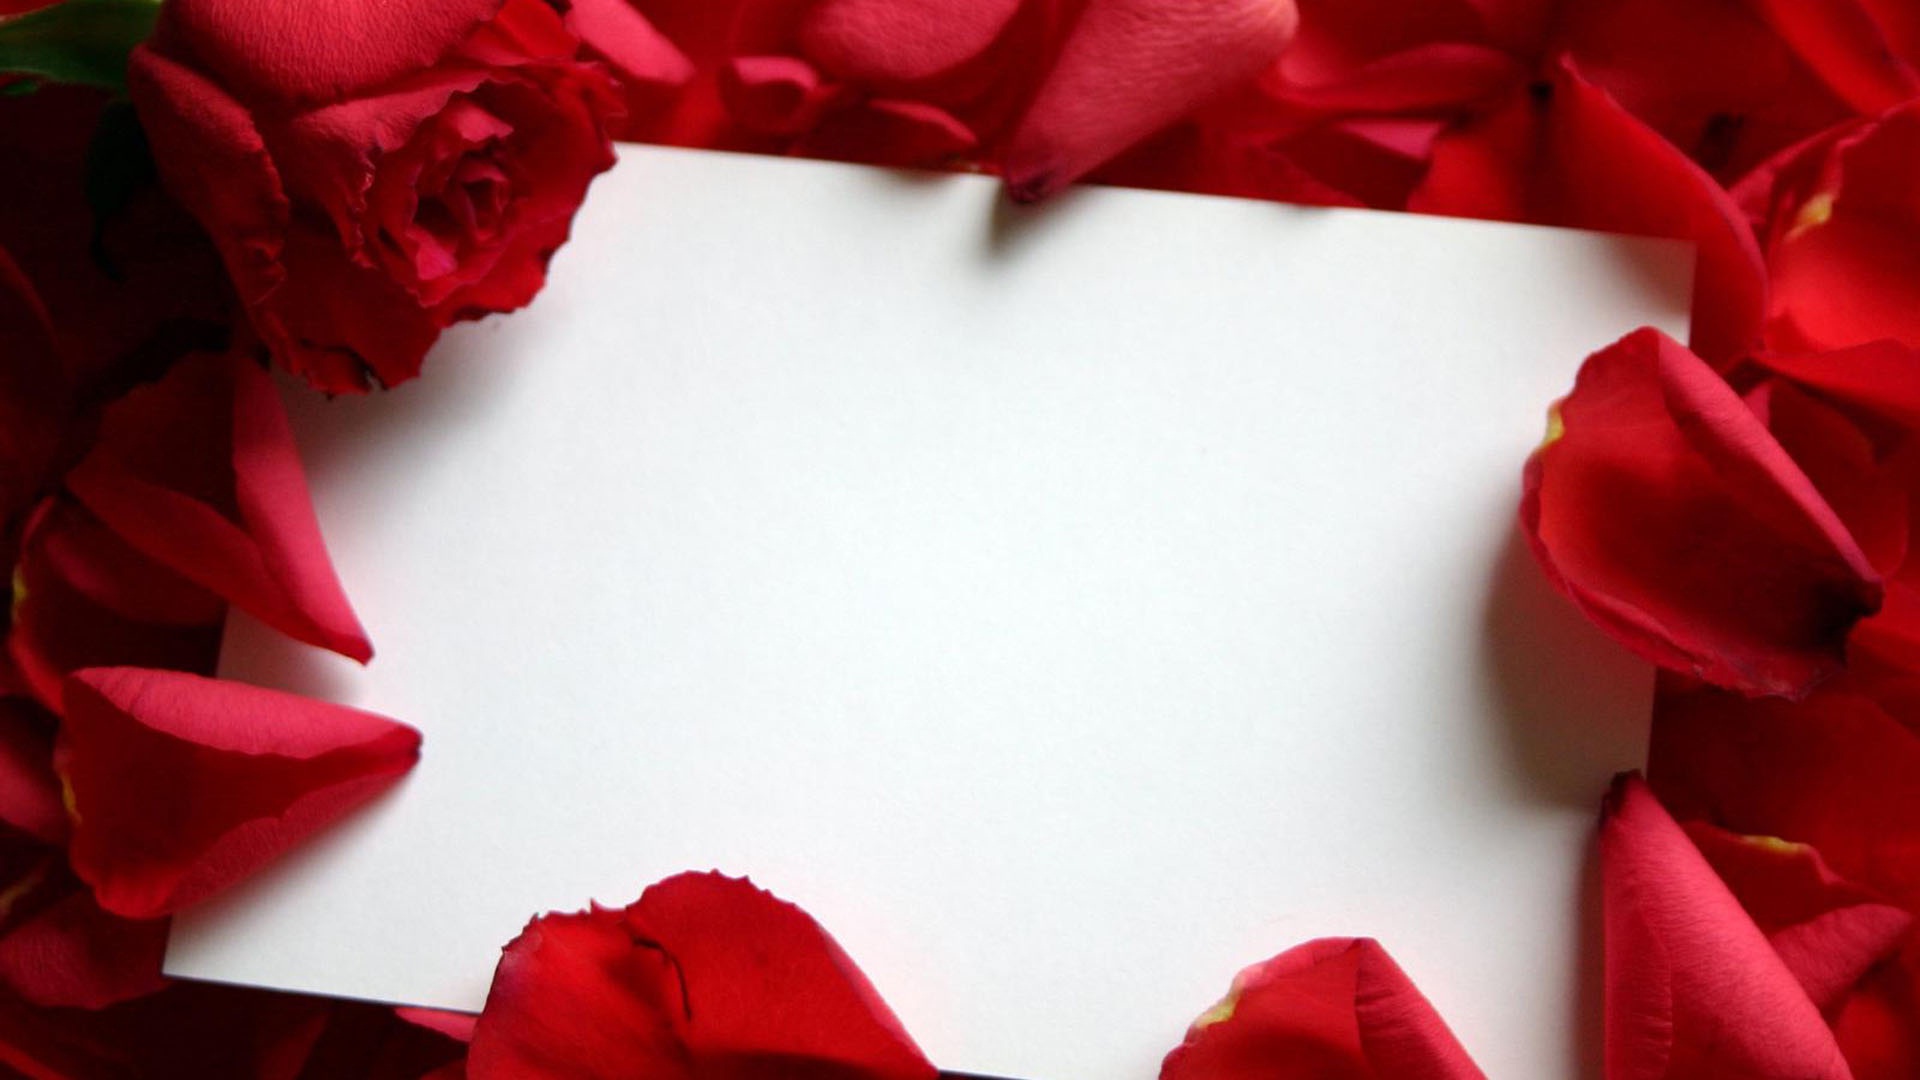 Love letter with red rose petals - New hd wallpaperNew hd wallpaper